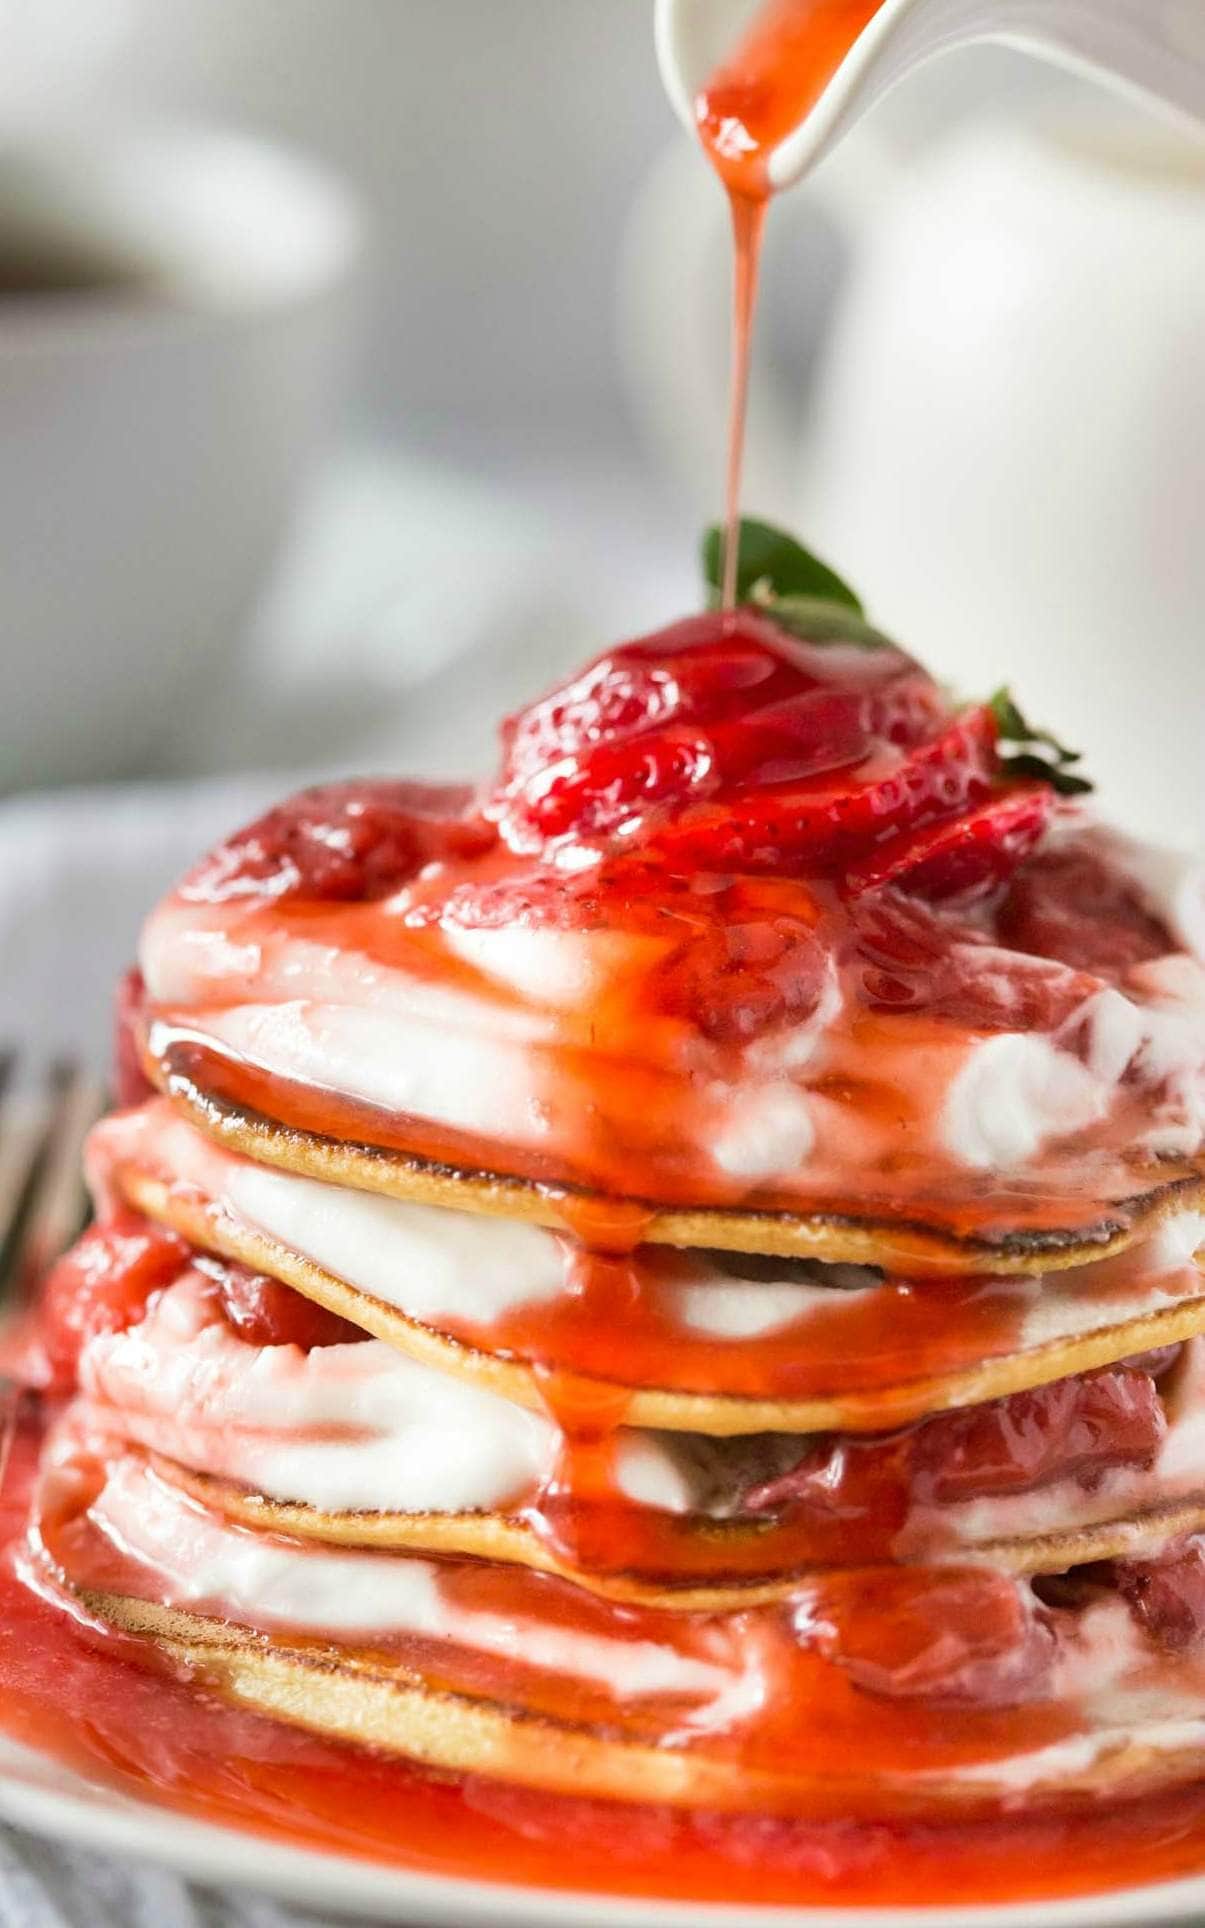 Delicious Low Carb Paleo Crepes with Strawberry sauce and Coconut Whipped Cream made in 15 minutes! Dairy Free, Gluten Free, Paleo and Grain Free.